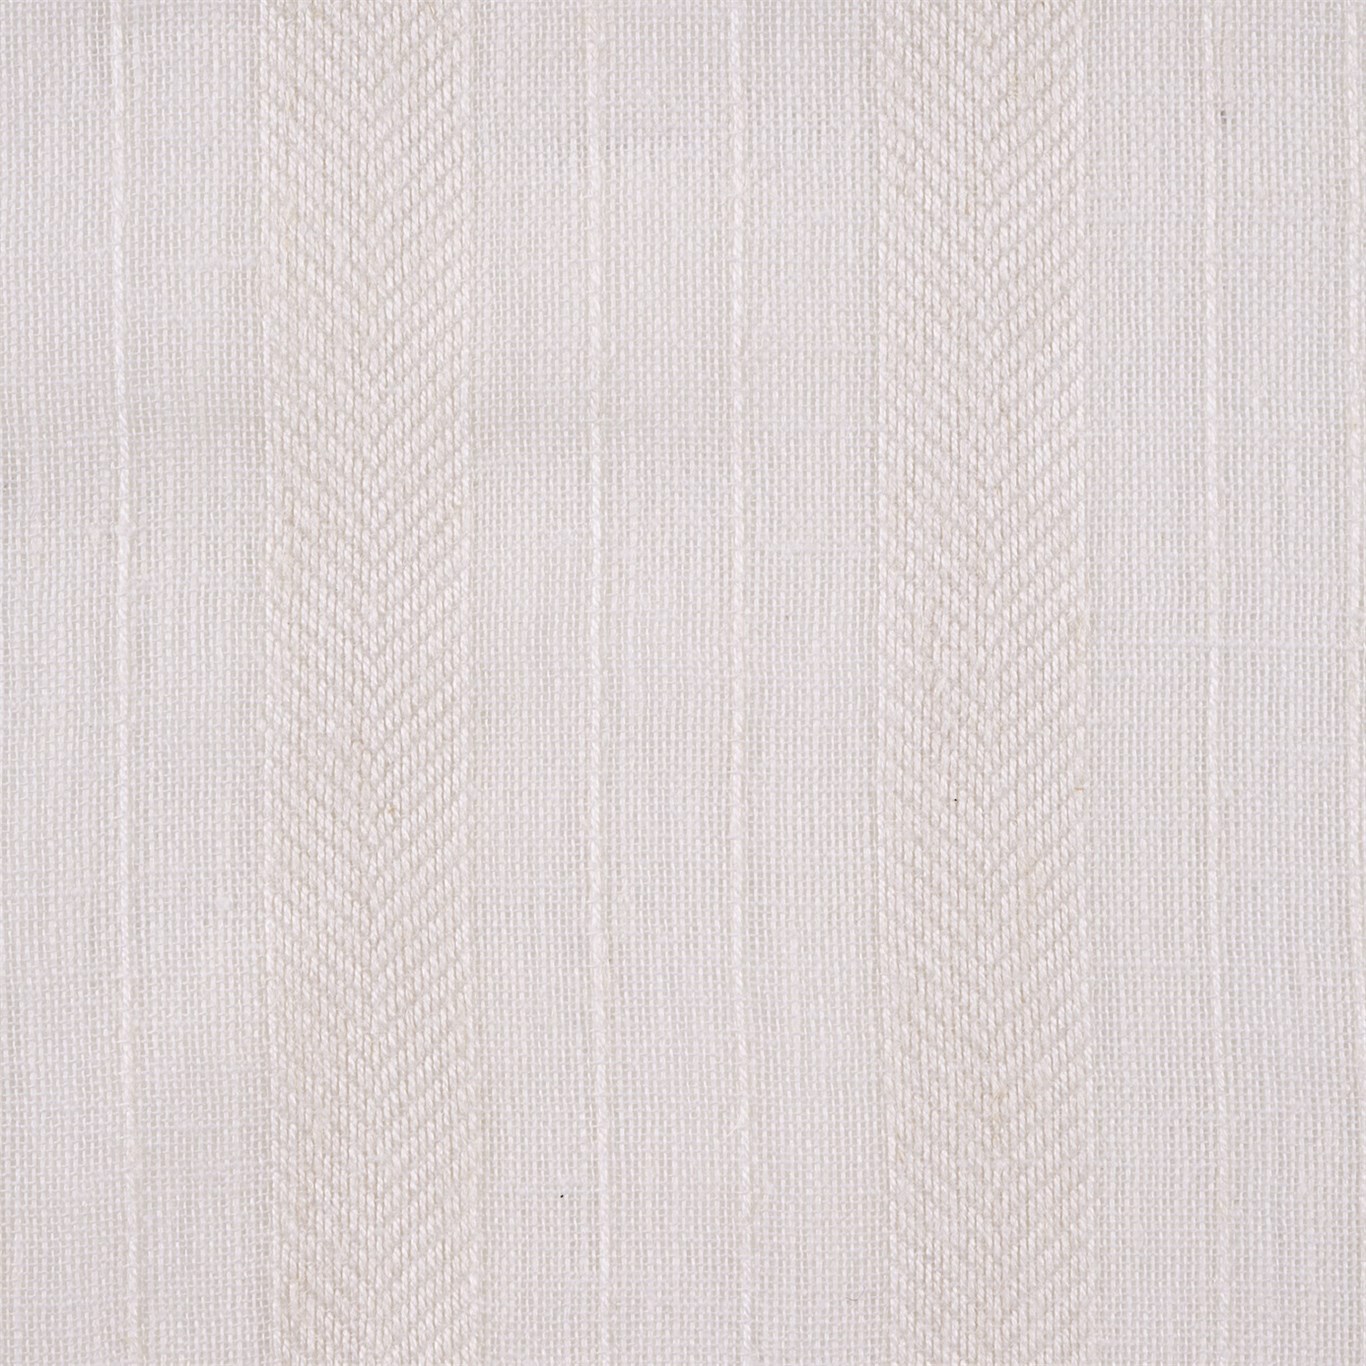 Purity Voiles Pearl Fabric by HAR